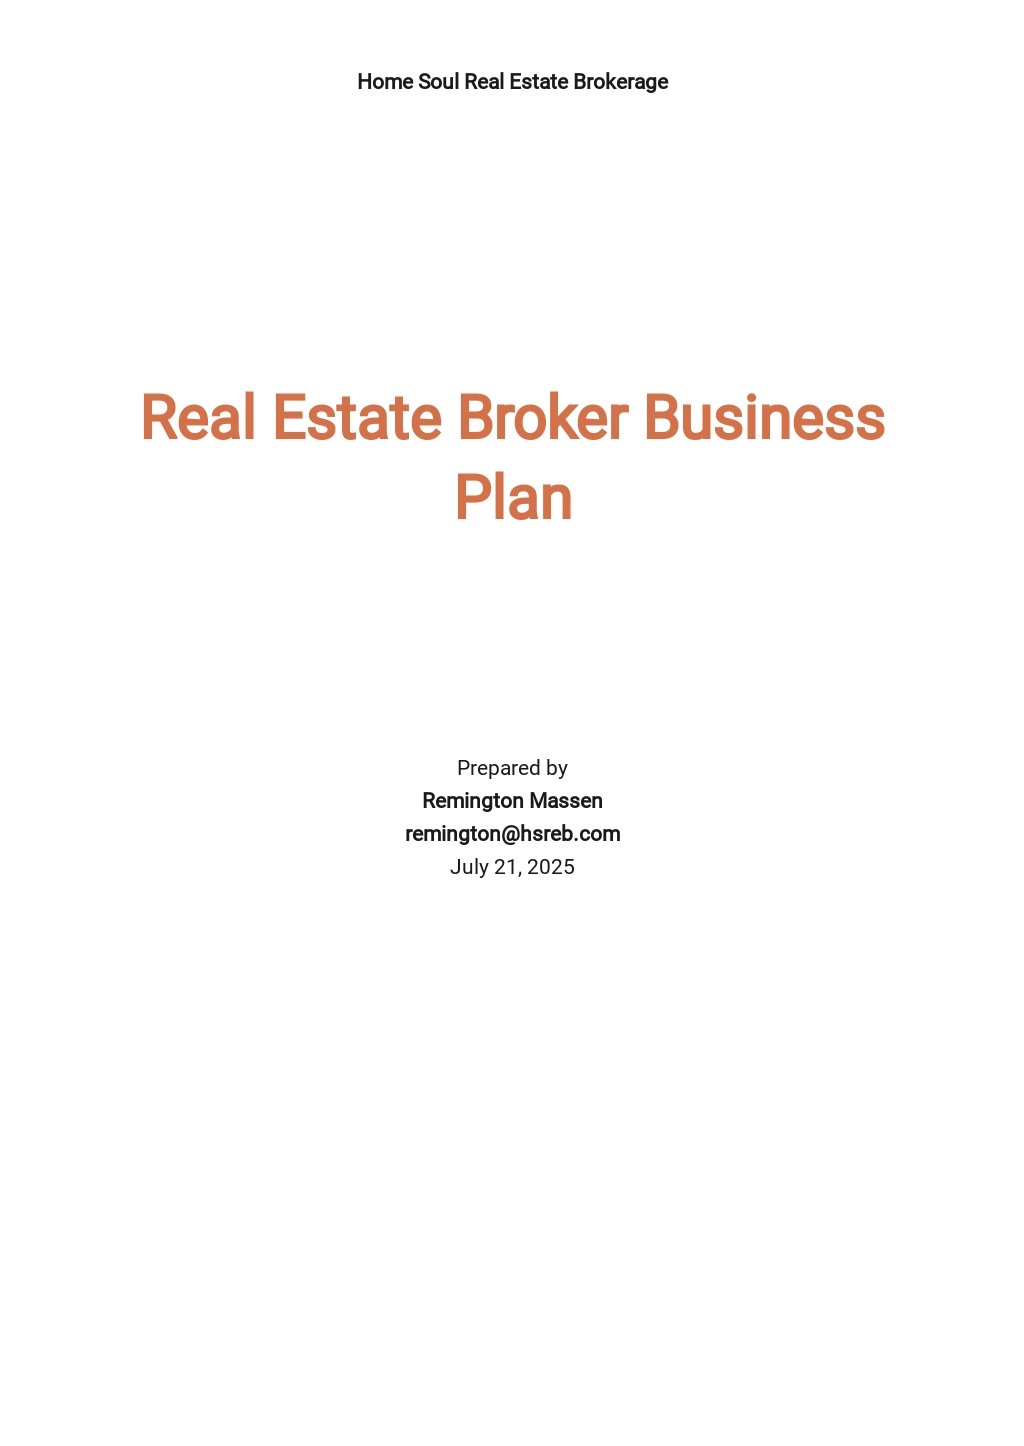 business plan for broker company